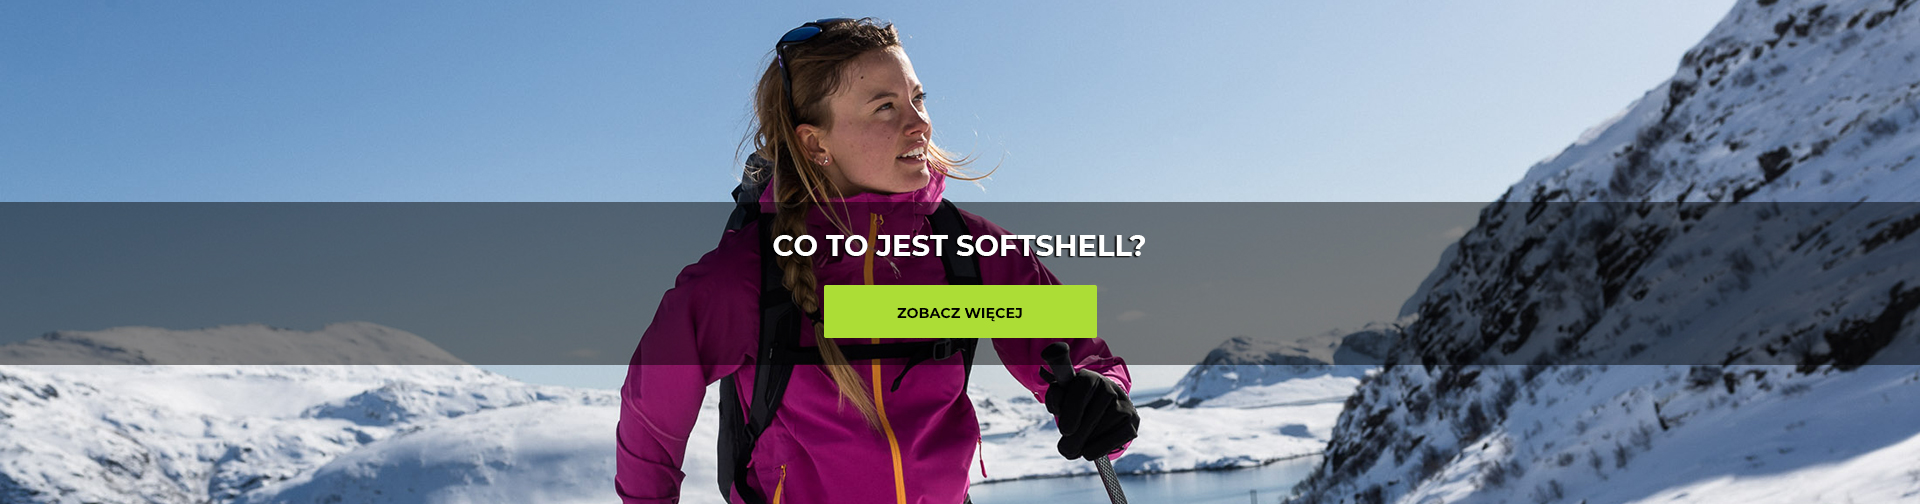 Co to jest softshell? 